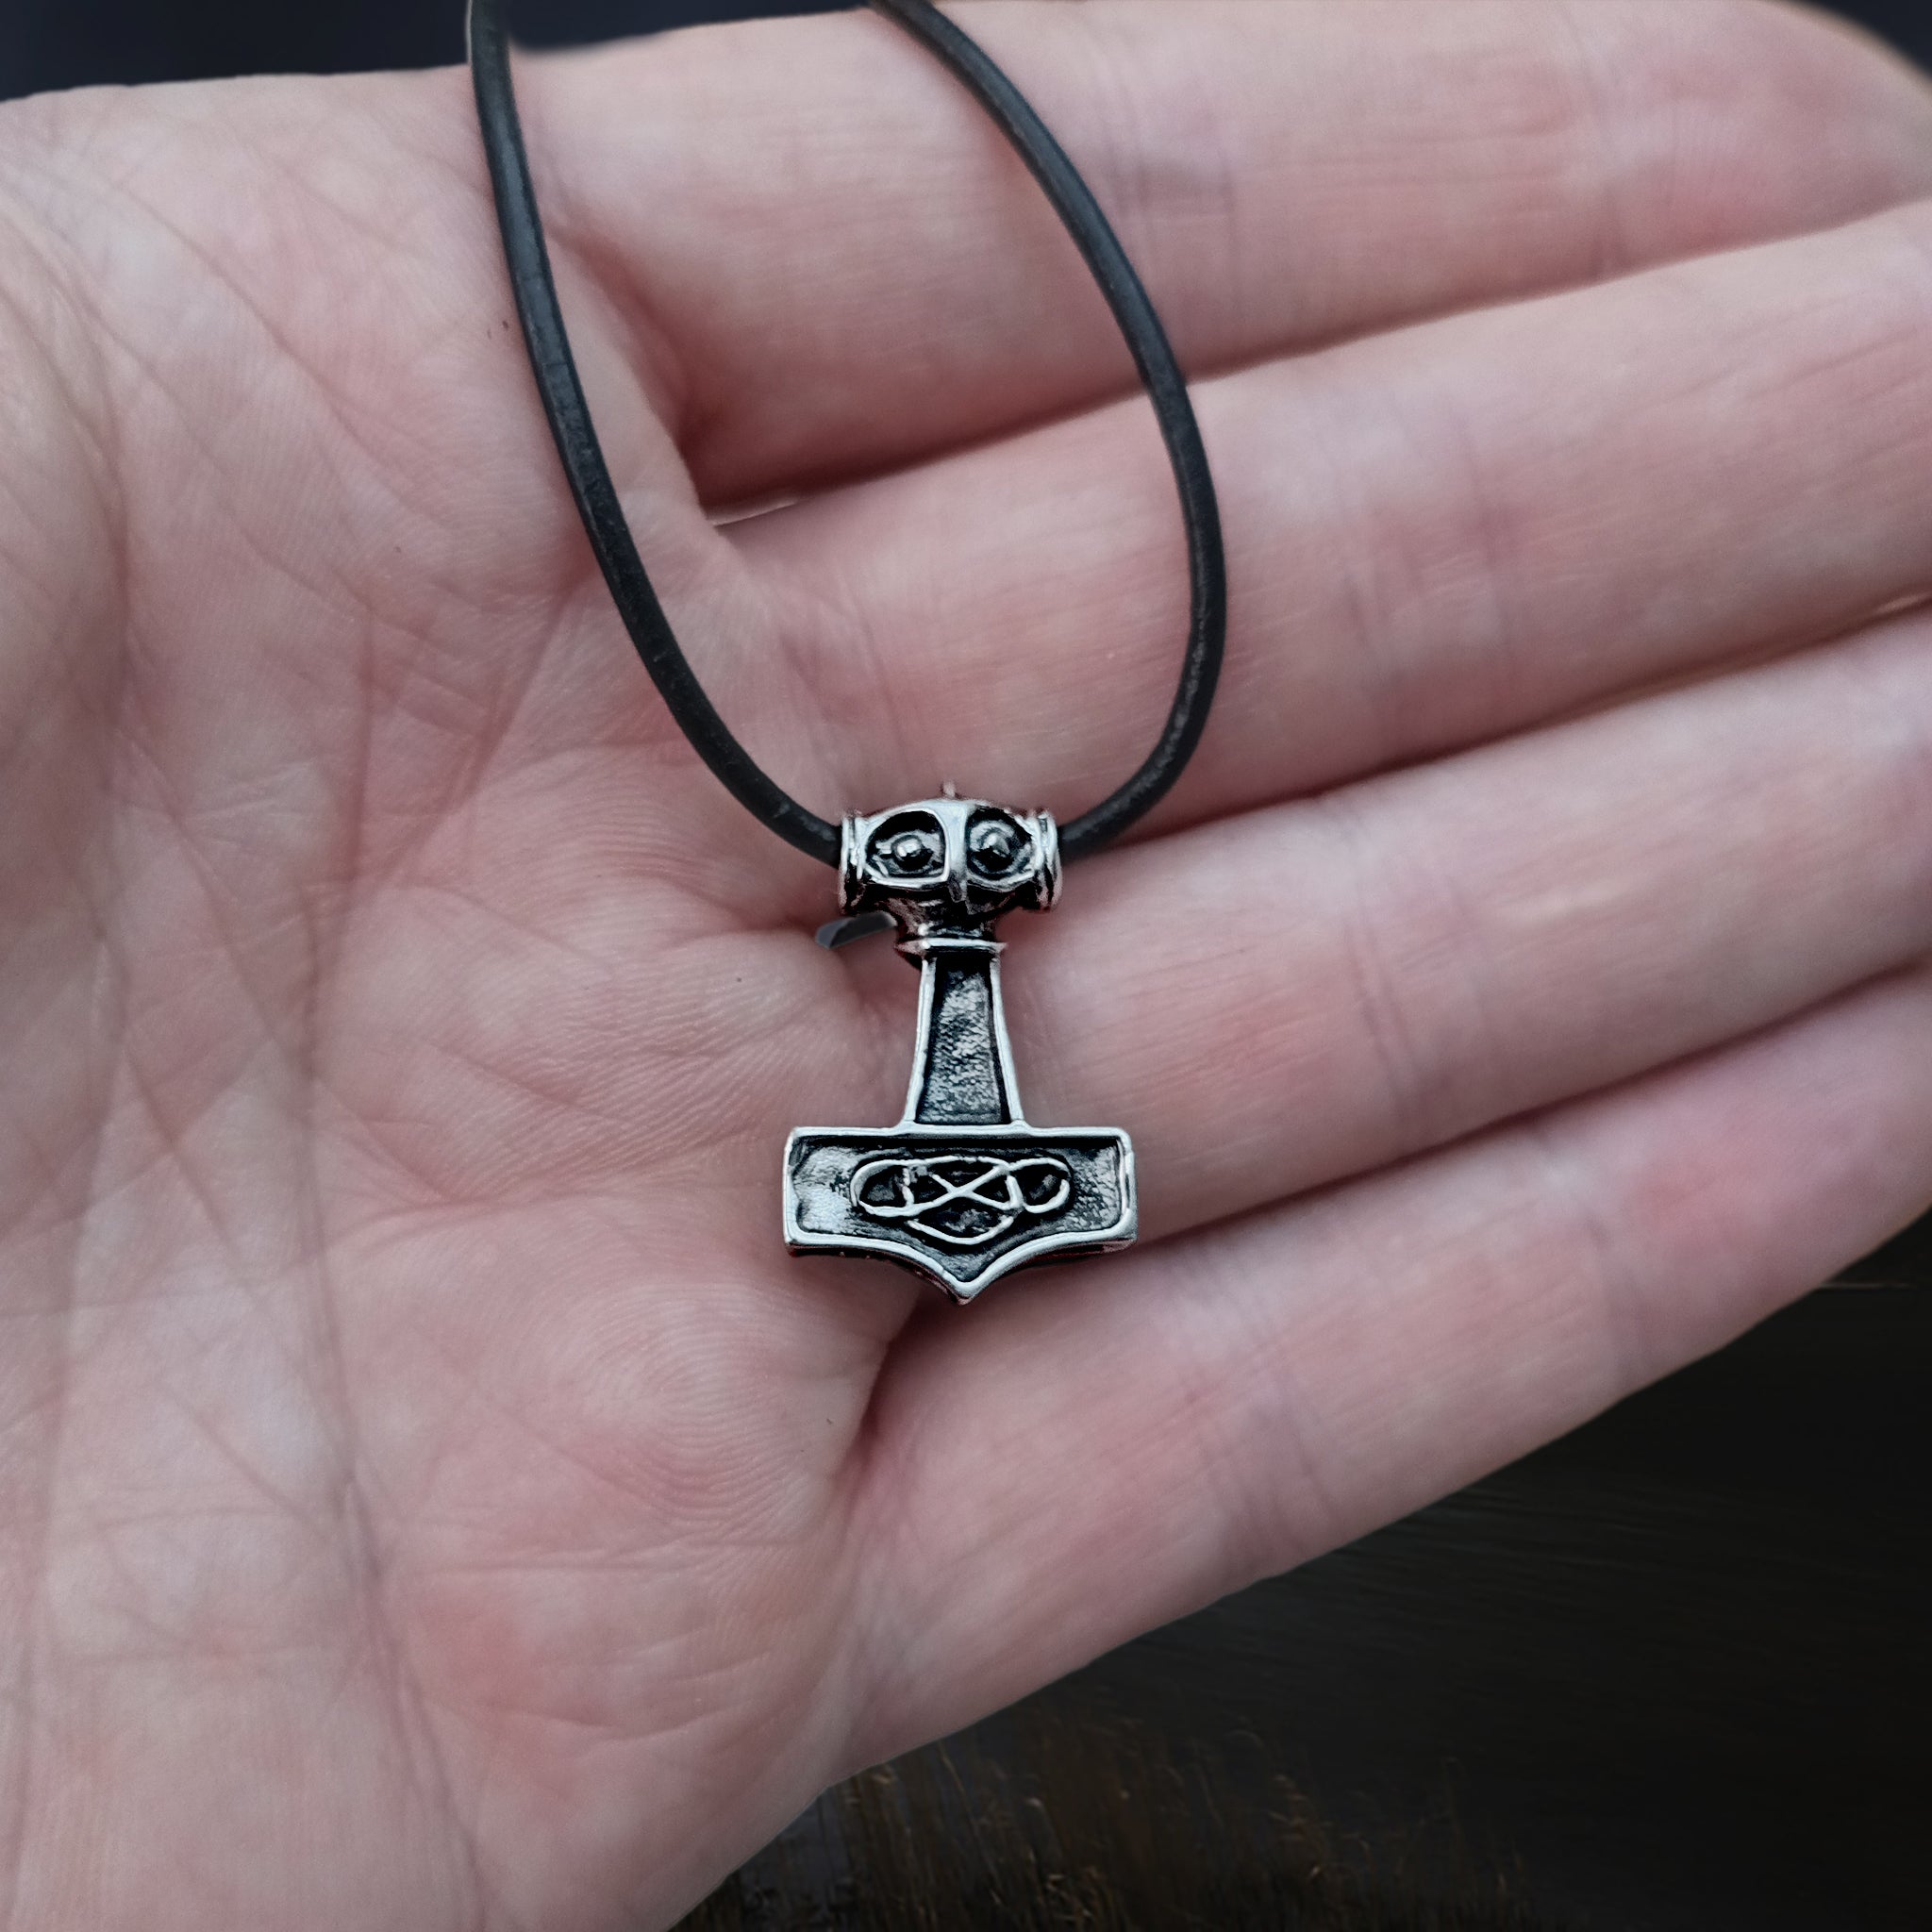 Small Silver Thunder Thors Hammer Viking Pendant on Leather Thong on Hand